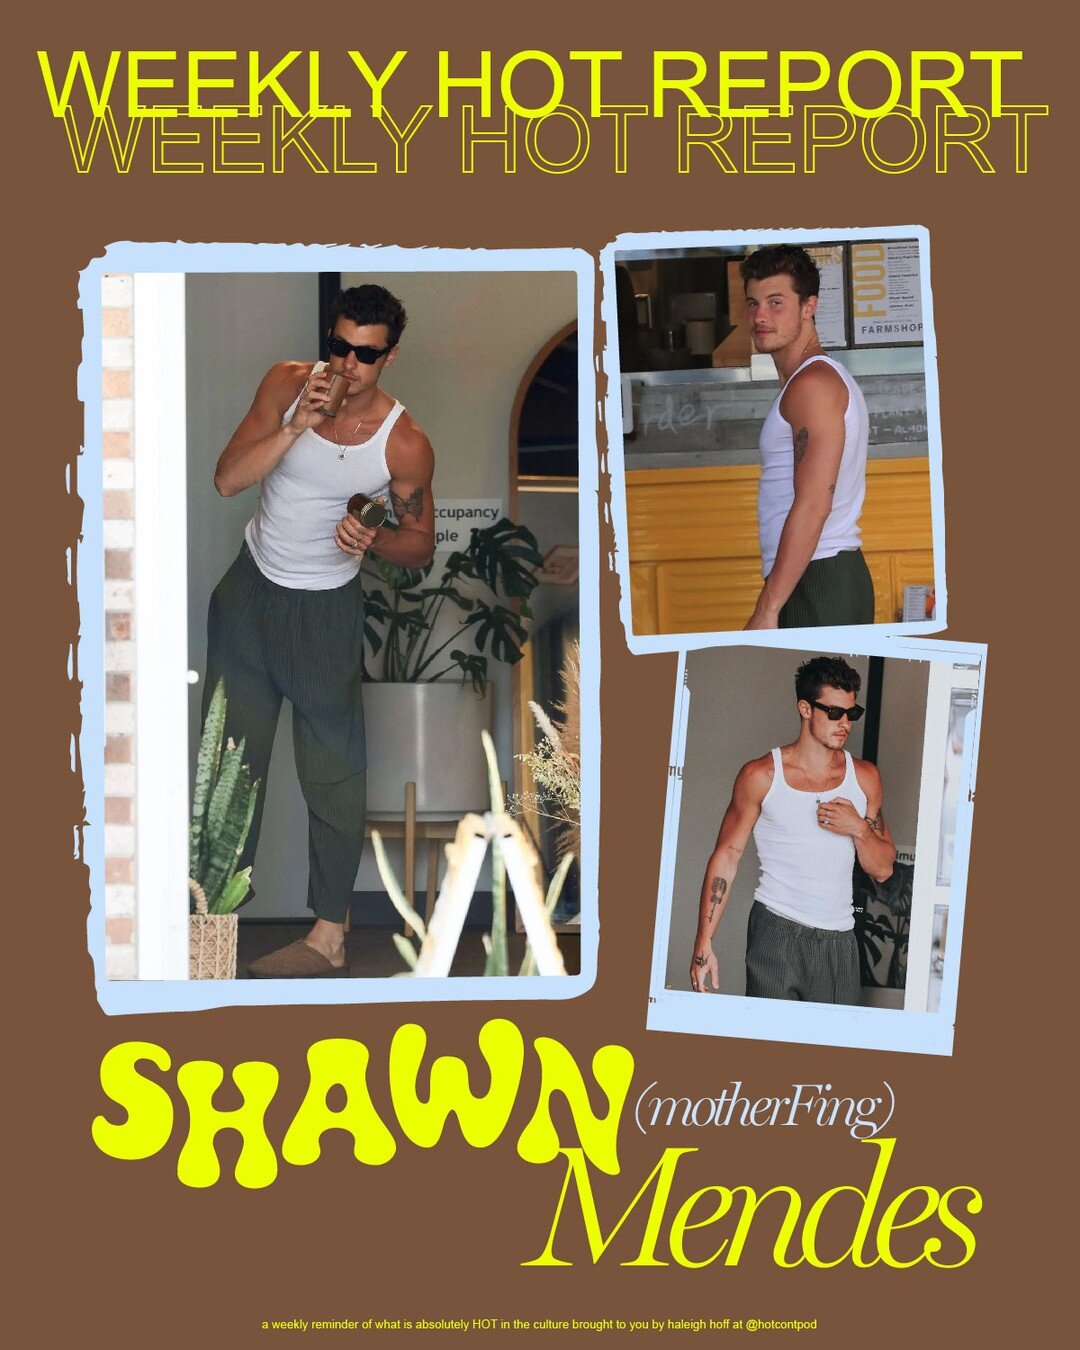 This week's HOTness is none other than my 2nd favorite Canadian pop singing hearthrob @shawnmendes 🔥 Sniffing candles and buying smoothies in his sweatpants. ICON behavior